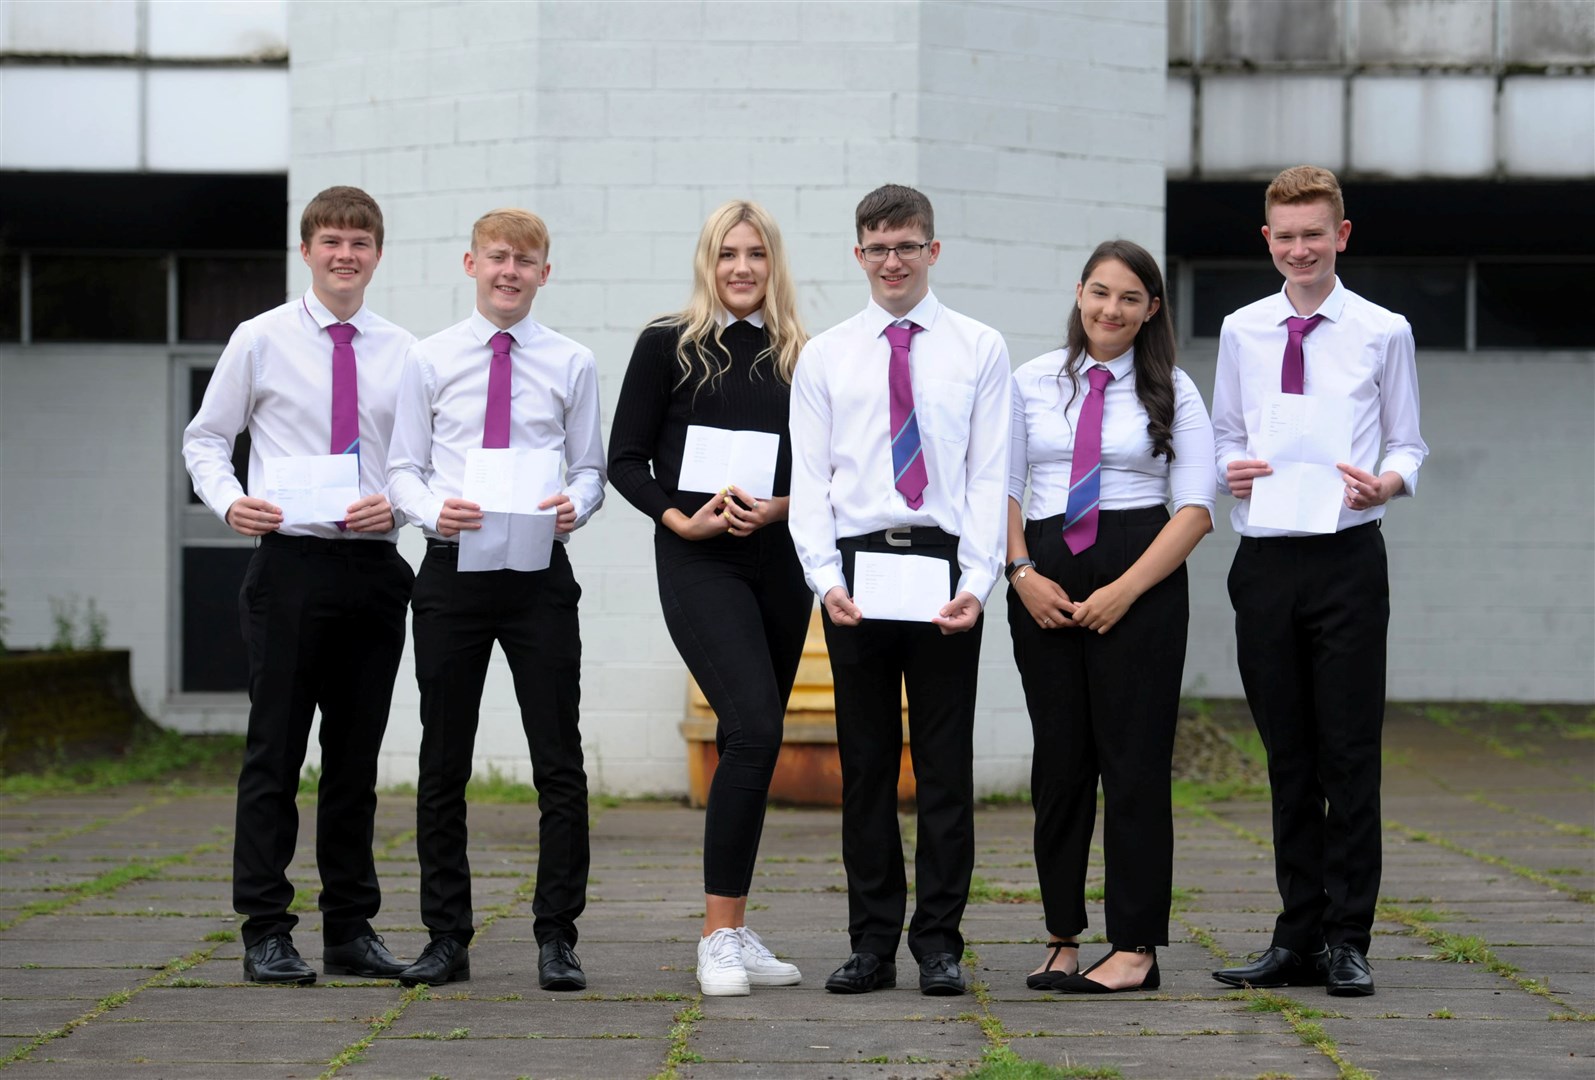 Alness Academy pupils Graeme Reily, Ryan Ross, Sarah Mackay, Ewen MacIver, Mollie McGoran and Daniel Bauer were amongst hundreds across the Highlands to receive their results this week. Picture: Callum Mackay. Image No. 044558